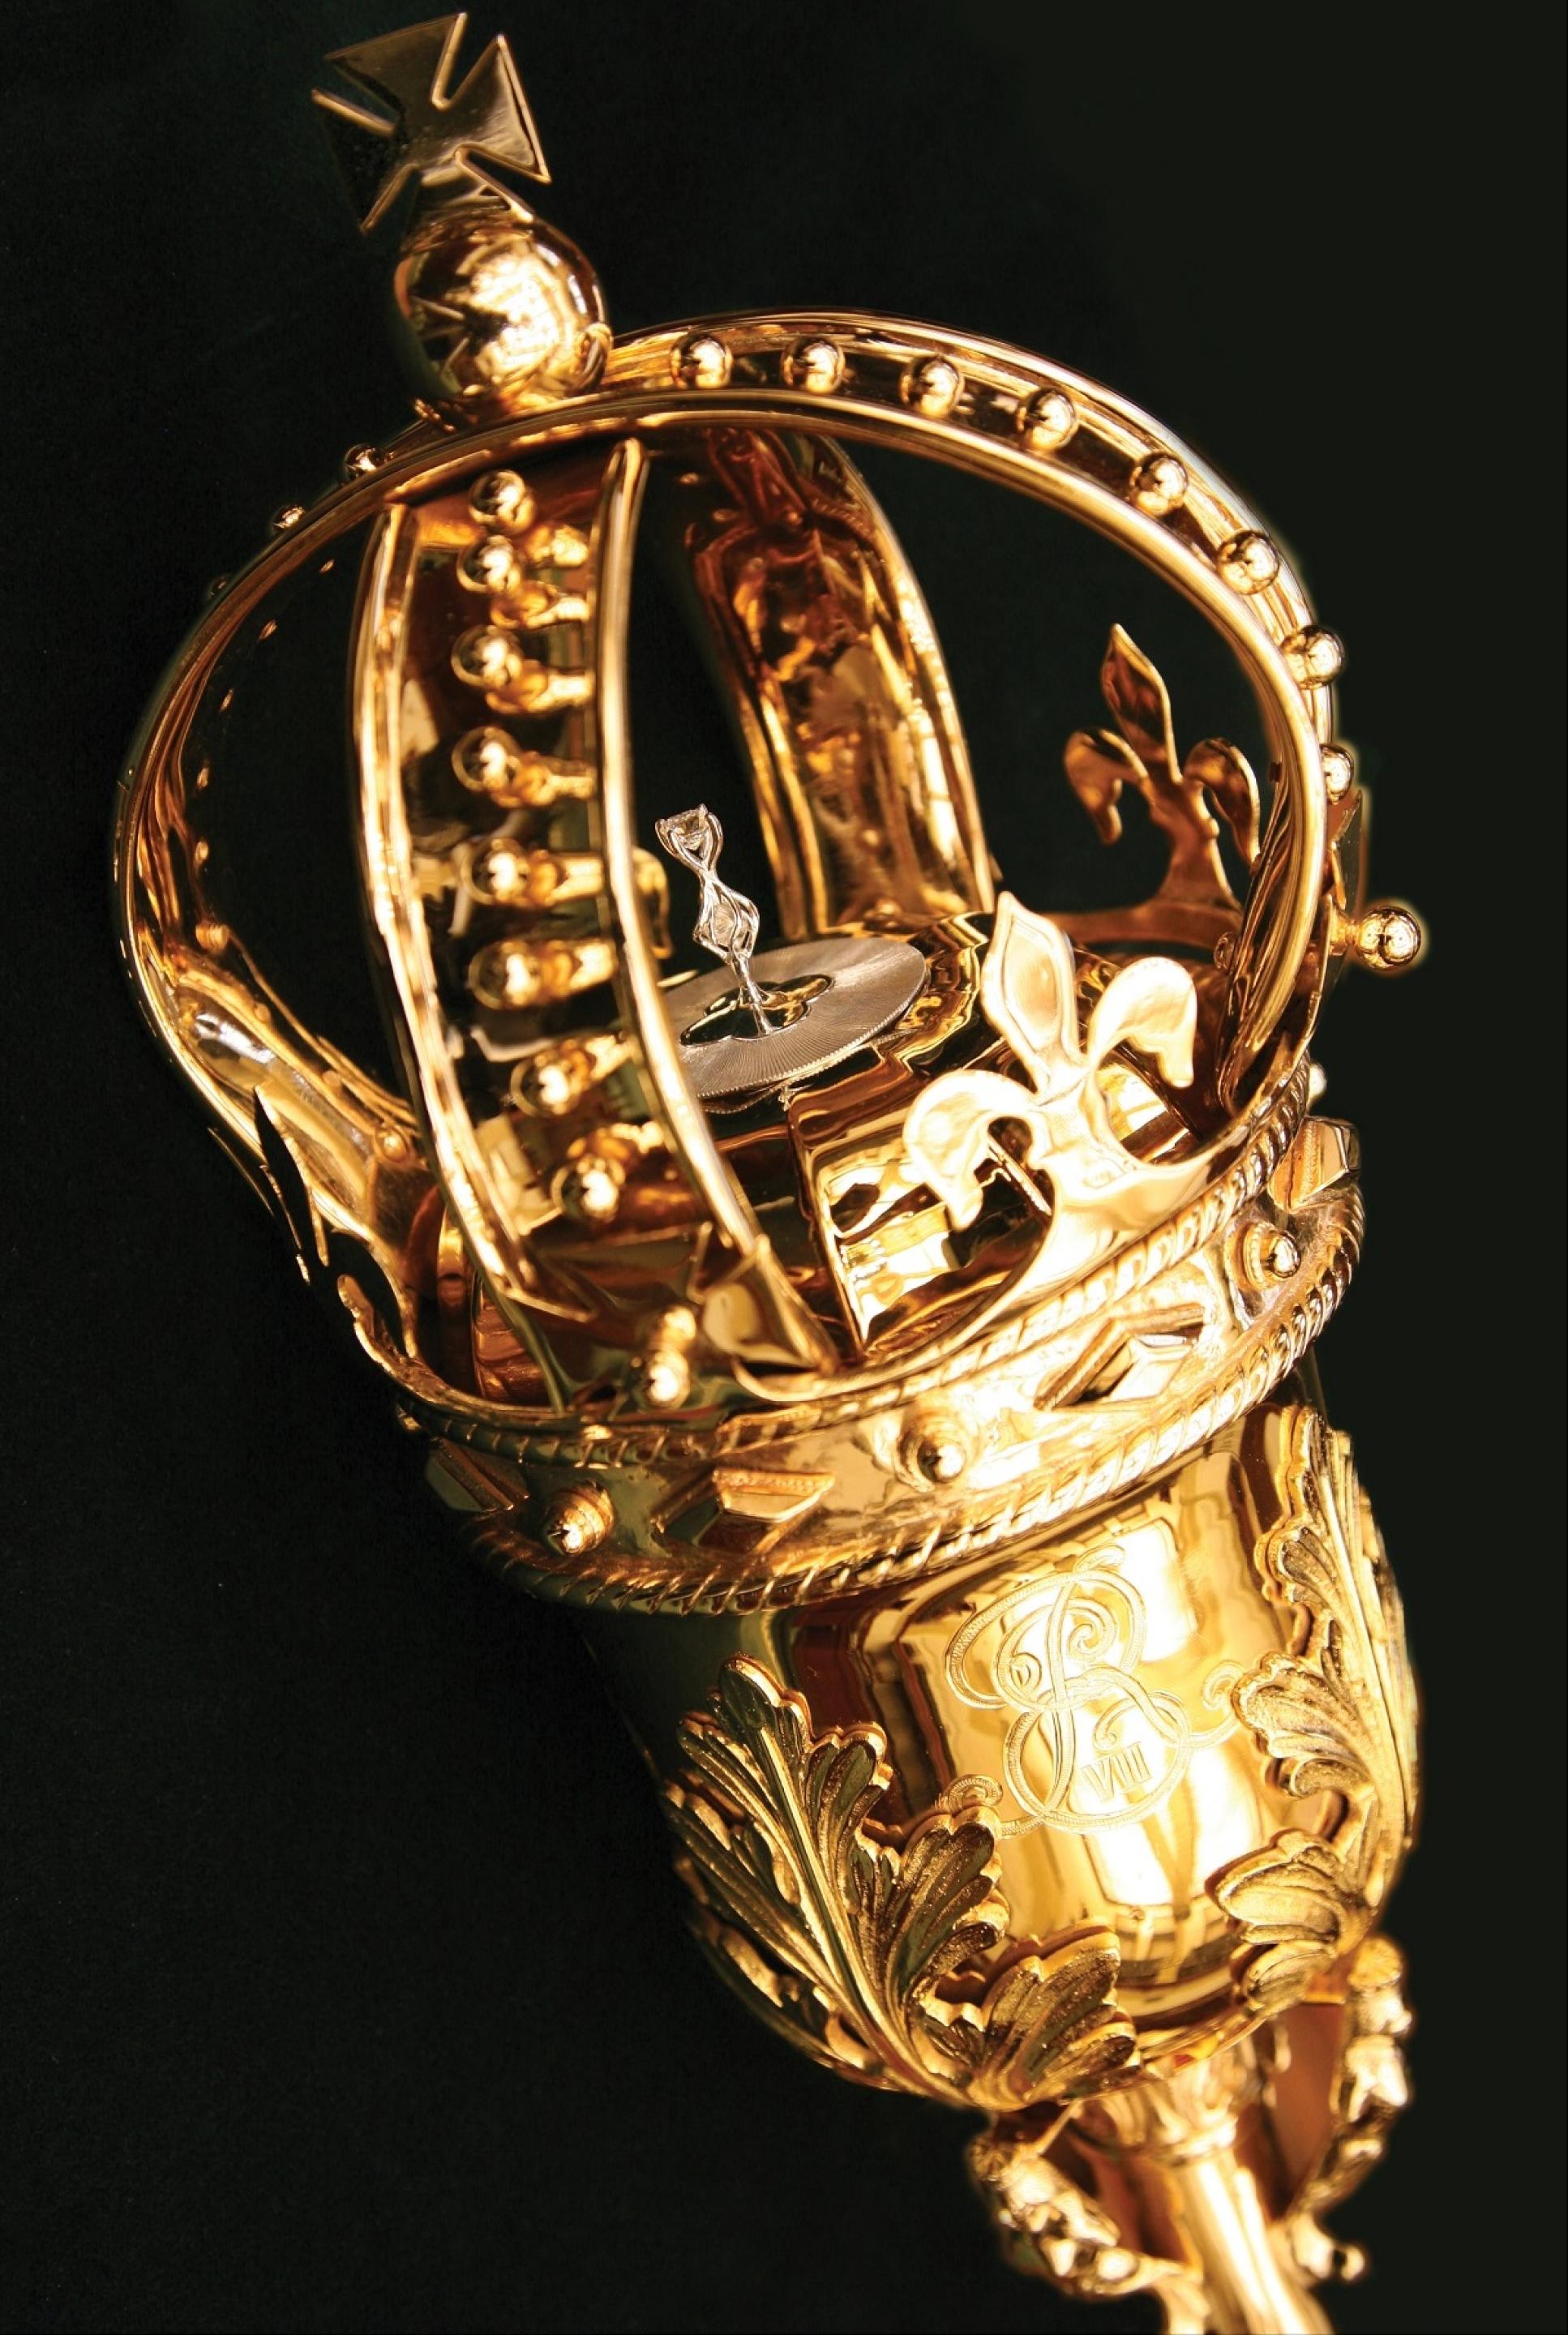 Close-up picture of the crown of Ontario's Mace